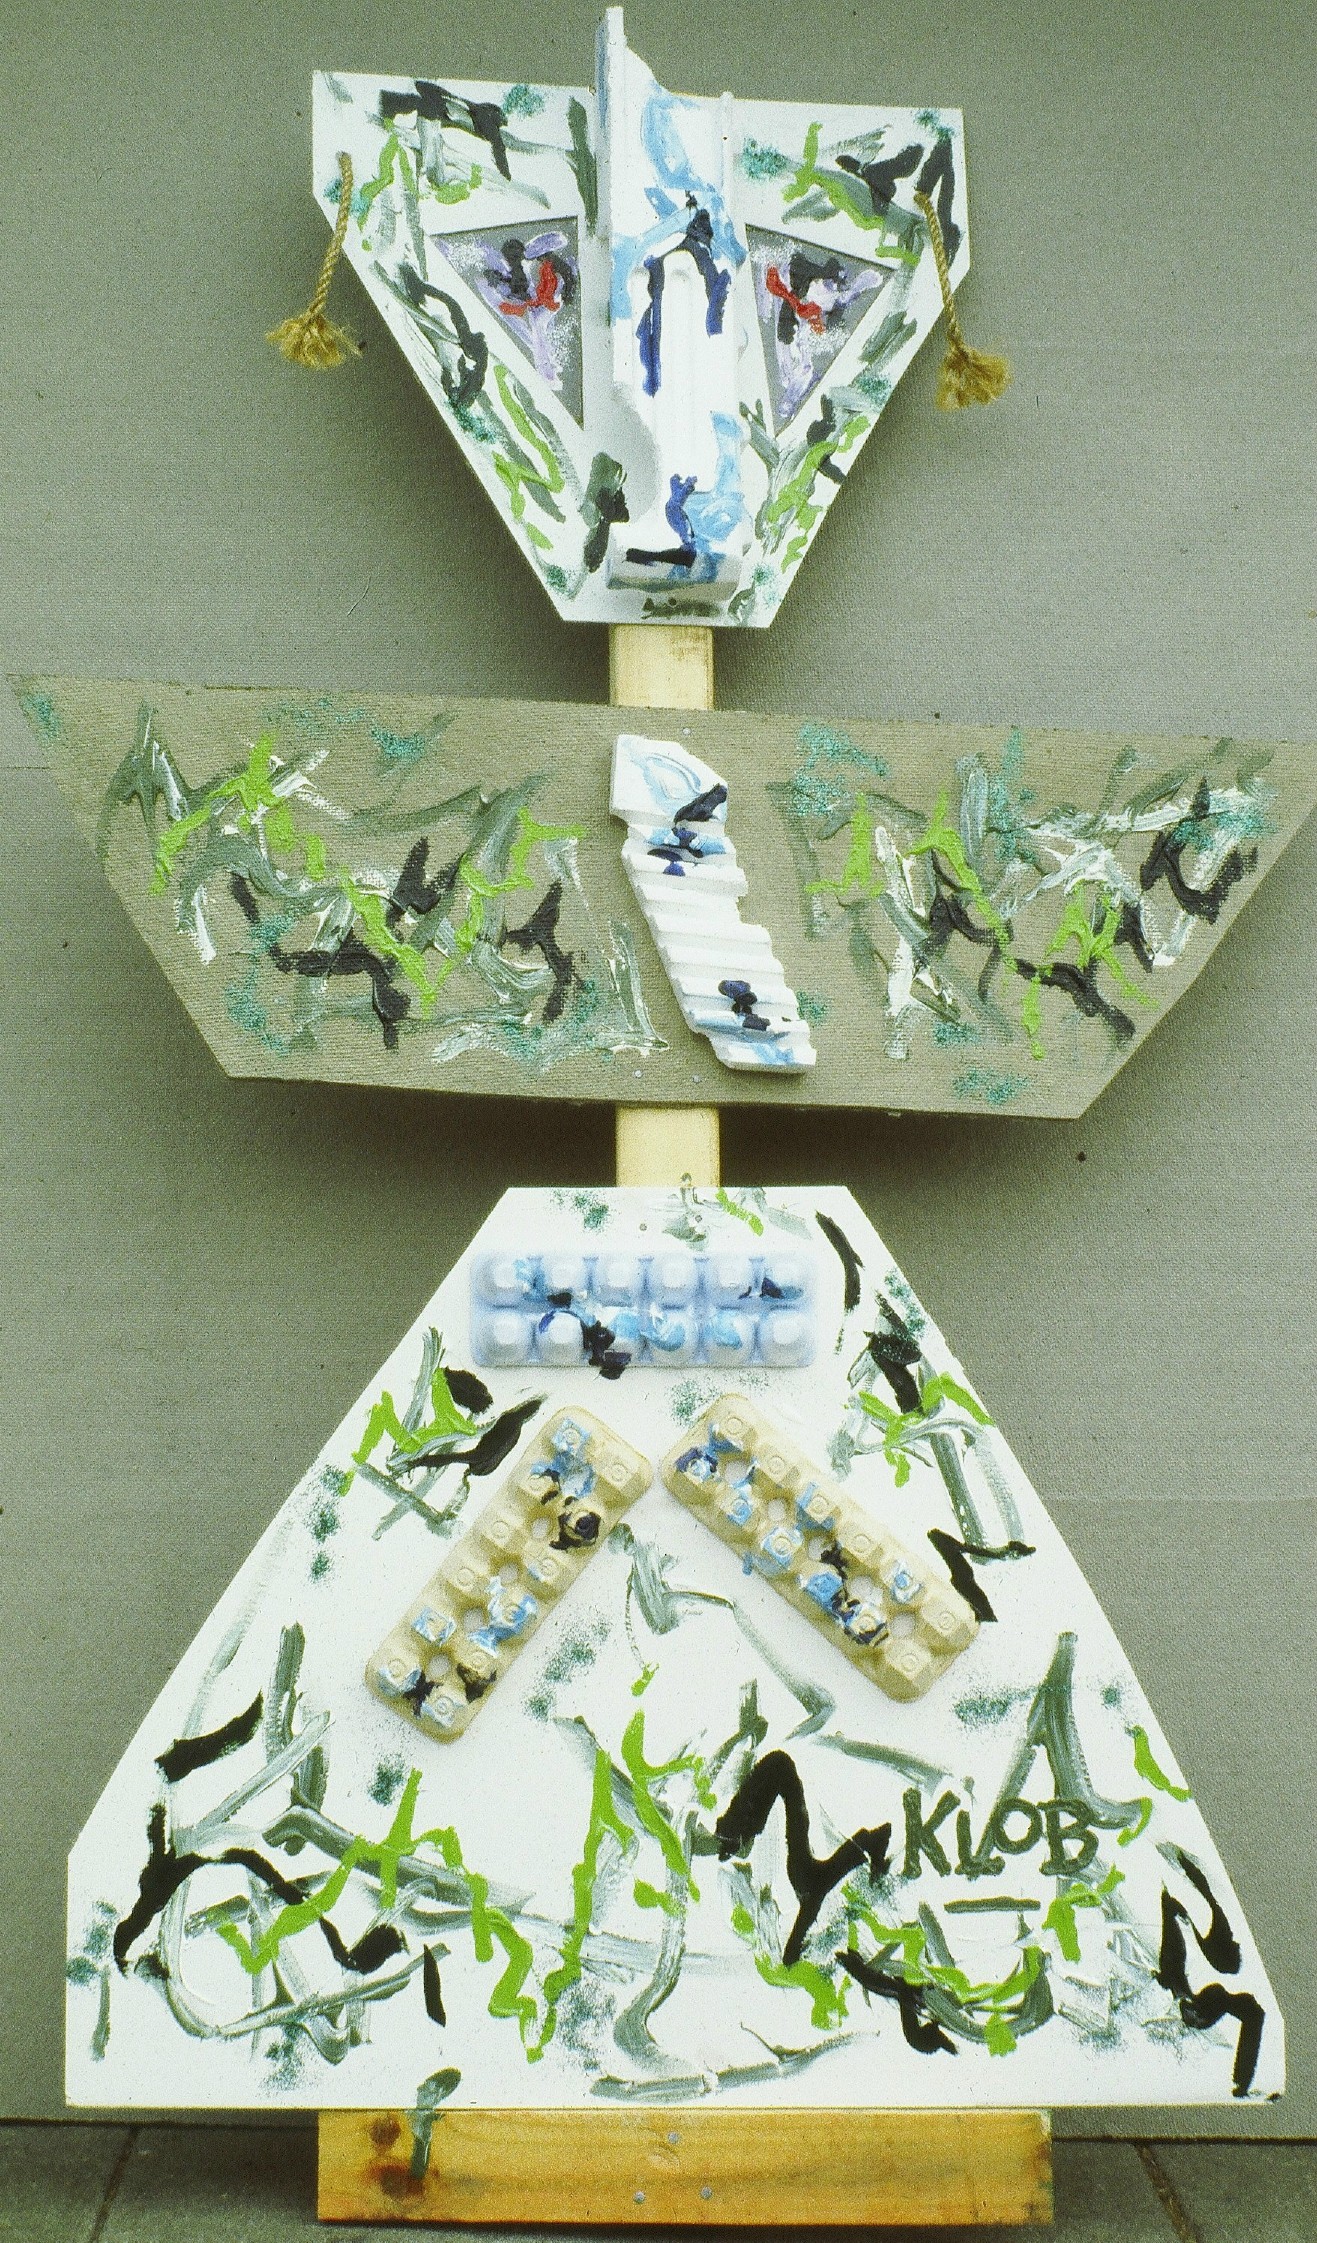 1979; acrylic, wood, homosote, canvas board, styrofoam, rope, egg cartons, wax paper; 6 ft 3 in X 36 in